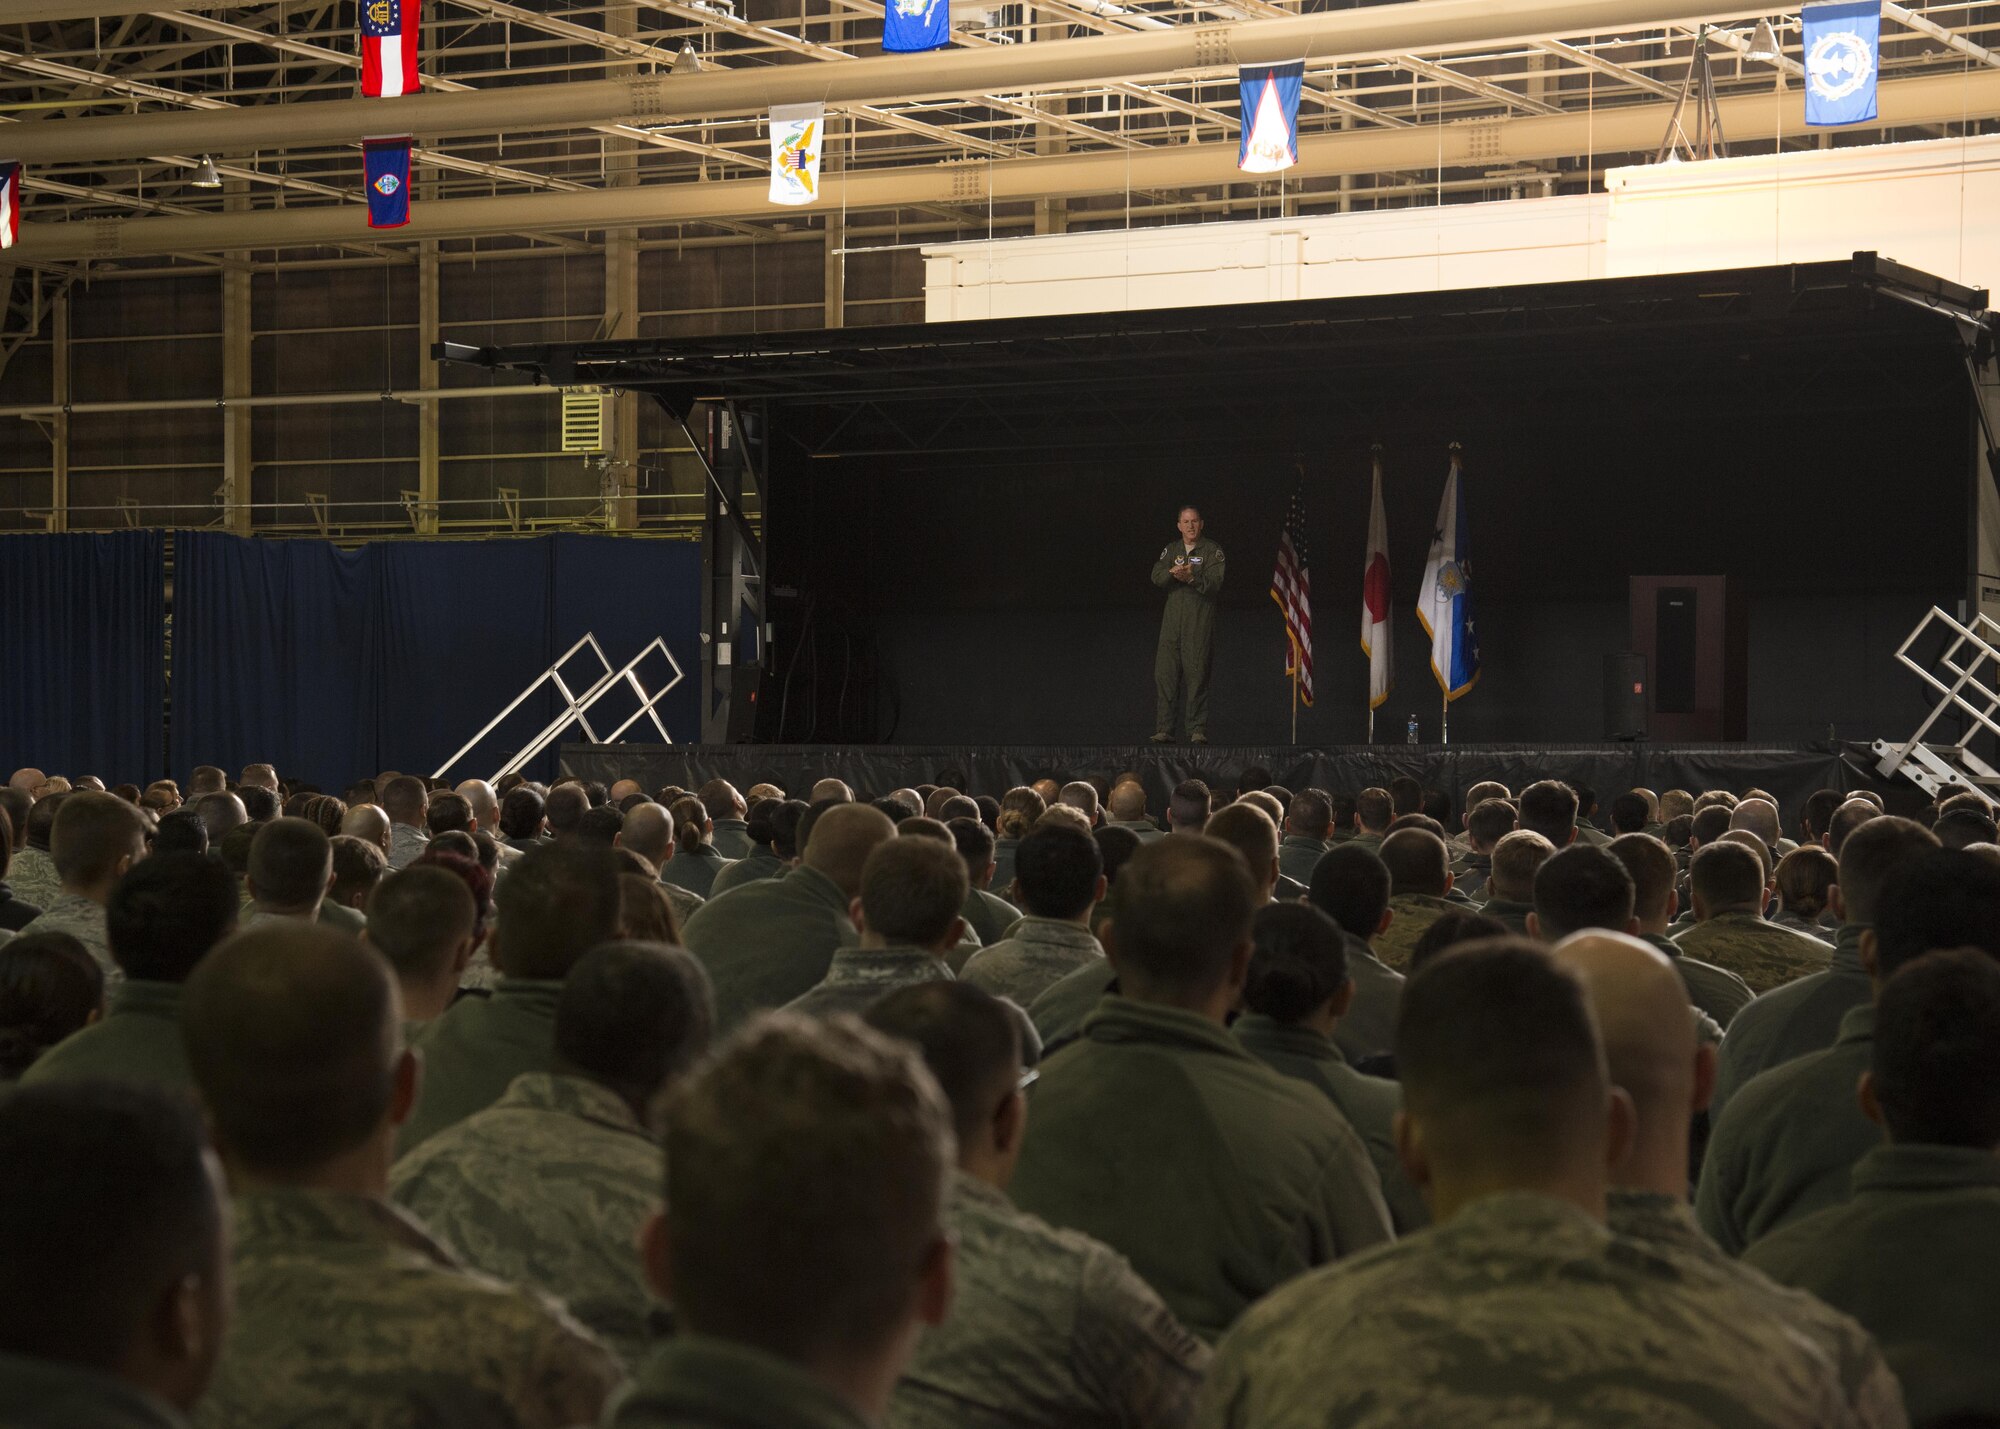 U.S. Air Force Chief of Staff, Gen. David L. Goldfein, addresses Airmen during an all-call at Misawa Air Base, Japan, Nov. 9, 2016. During his immersion tour, Goldfein took time to address many opportunities Airmen and their civilian counterparts have at Misawa, while discussing his focus areas as CSAF. (U.S. Air Force photo by Airman 1st Class Sadie Colbert)